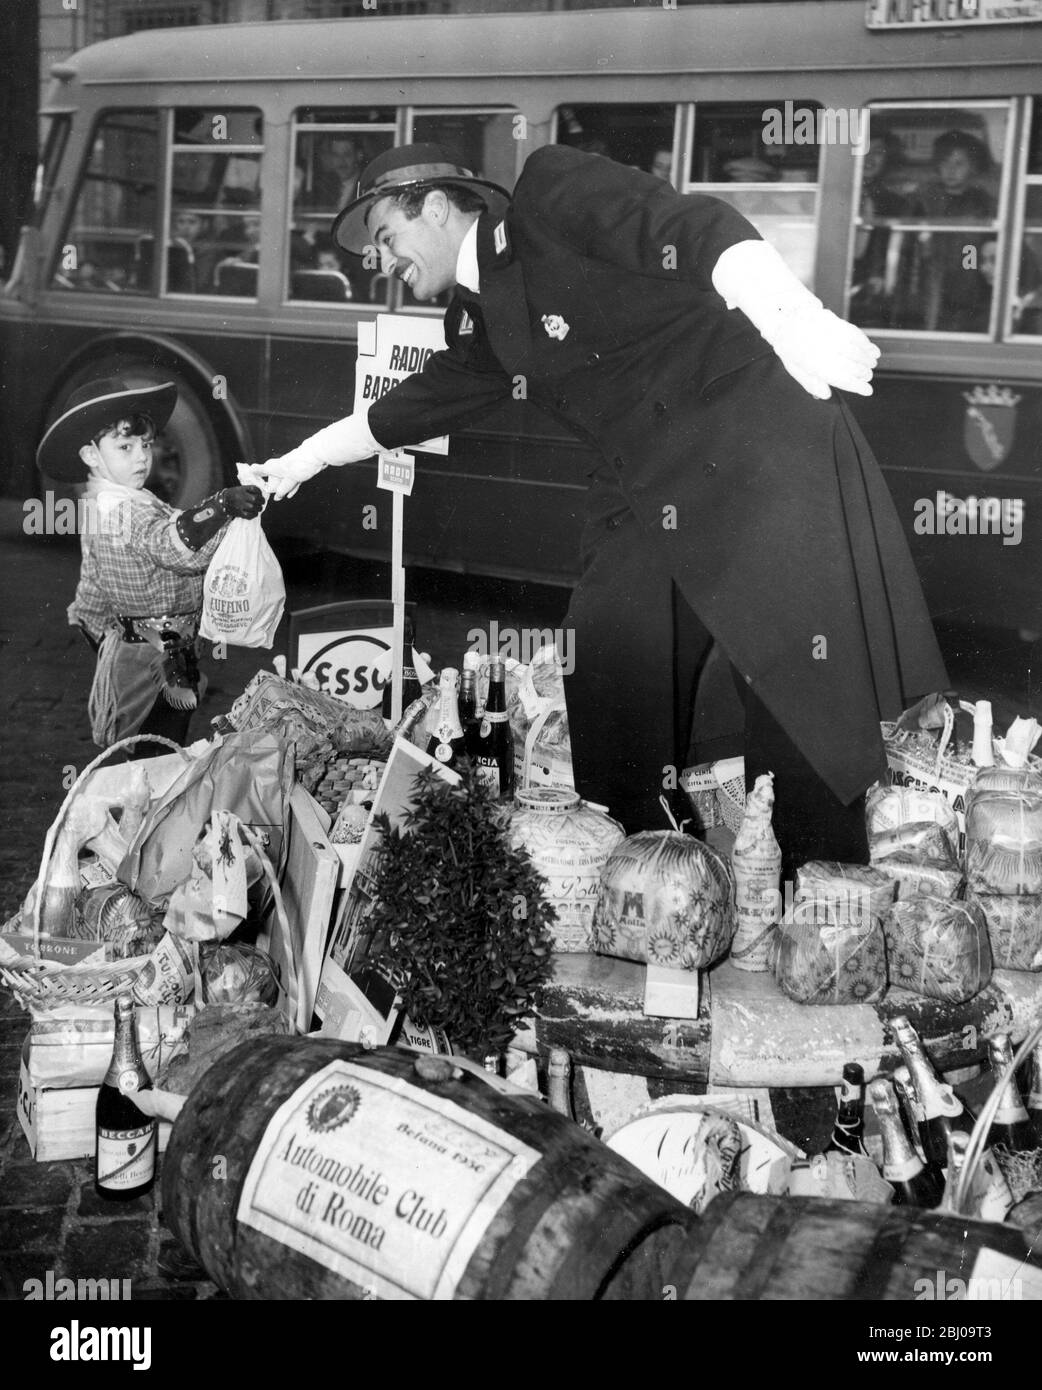 Italy . - January 6 feast of the Epiphany in Rome . - Four year old boy in cowboy outfit hands a flask of wine to the Traffic Police in the Piazza Venezia . - 9 January 1950 - - Stock Photo